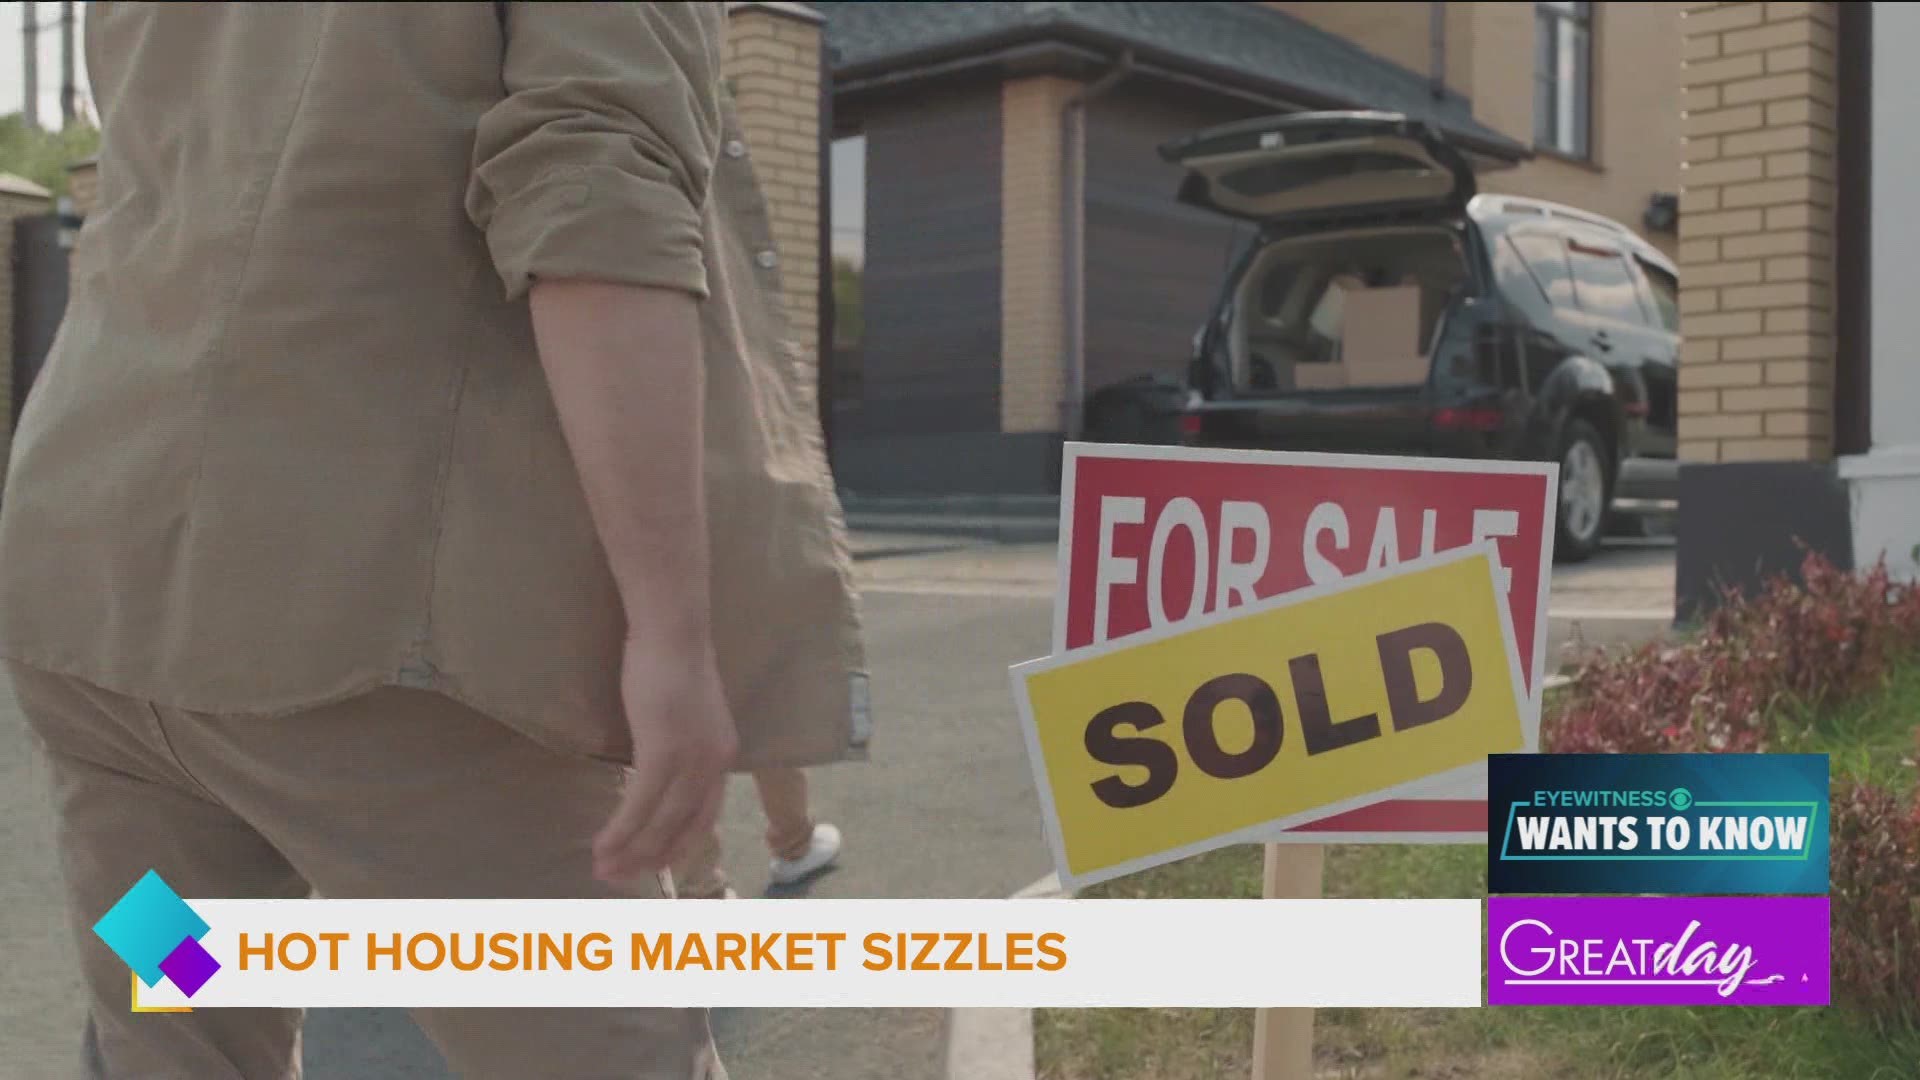 While the housing market is sizzling, many people are having to be competitive with the sale of their homes.